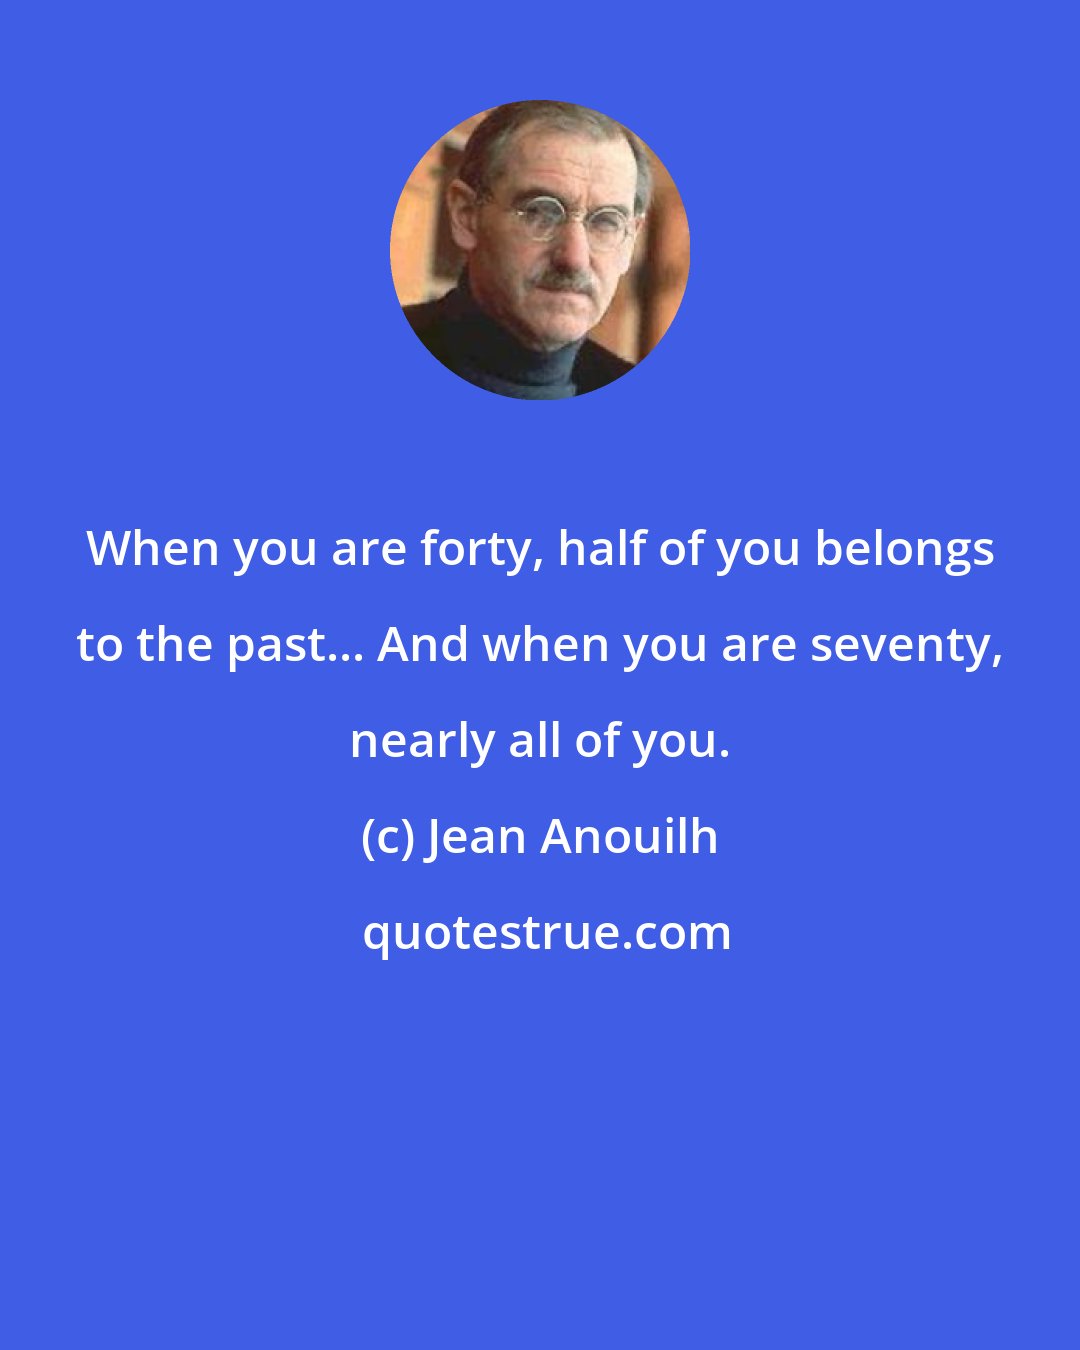 Jean Anouilh: When you are forty, half of you belongs to the past... And when you are seventy, nearly all of you.